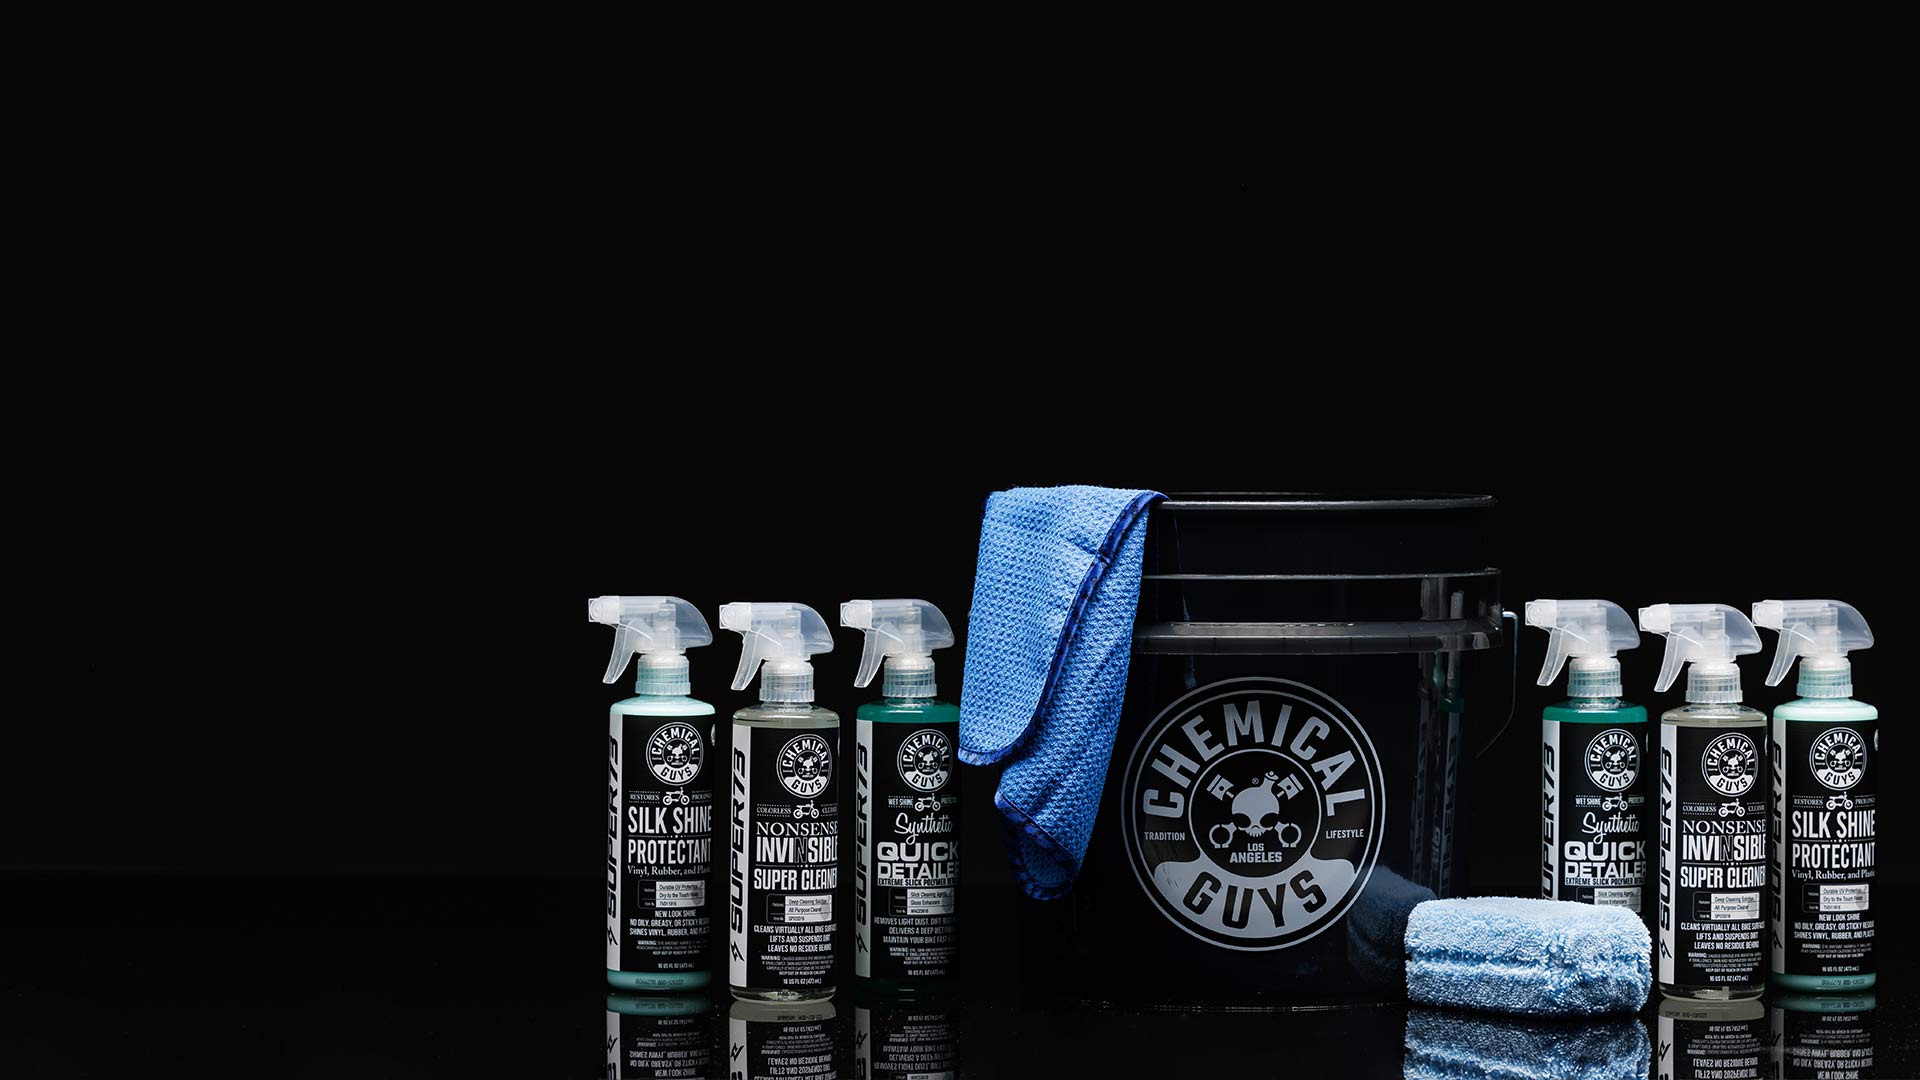 Studio image showcasing SUPER73 x Chemical Guys products